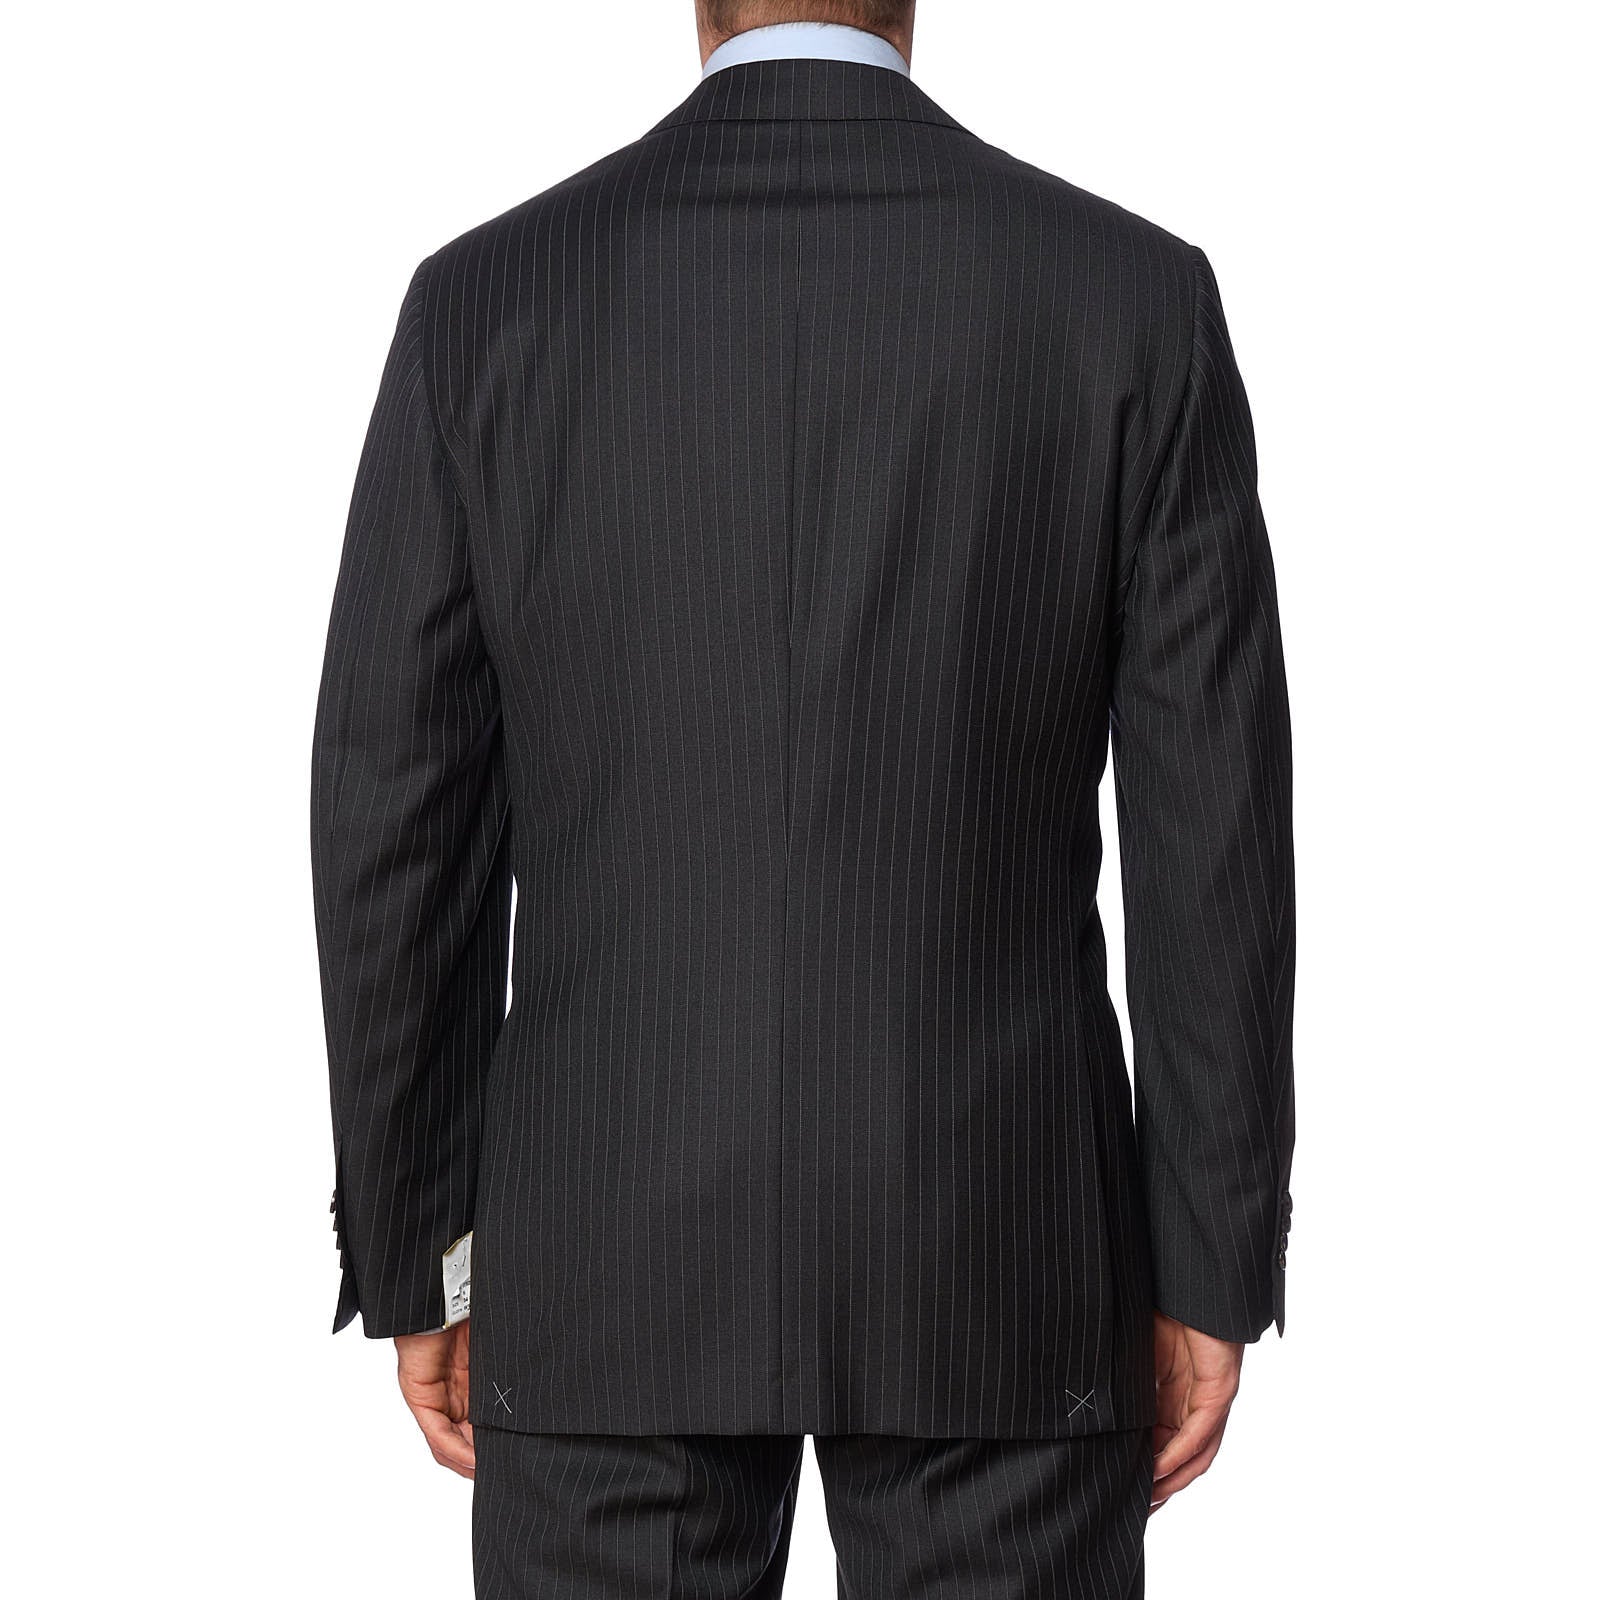 D'AVENZA Handmade Charcoal Gray Pinstriped Wool Suit EU 54 NEW US 42-44